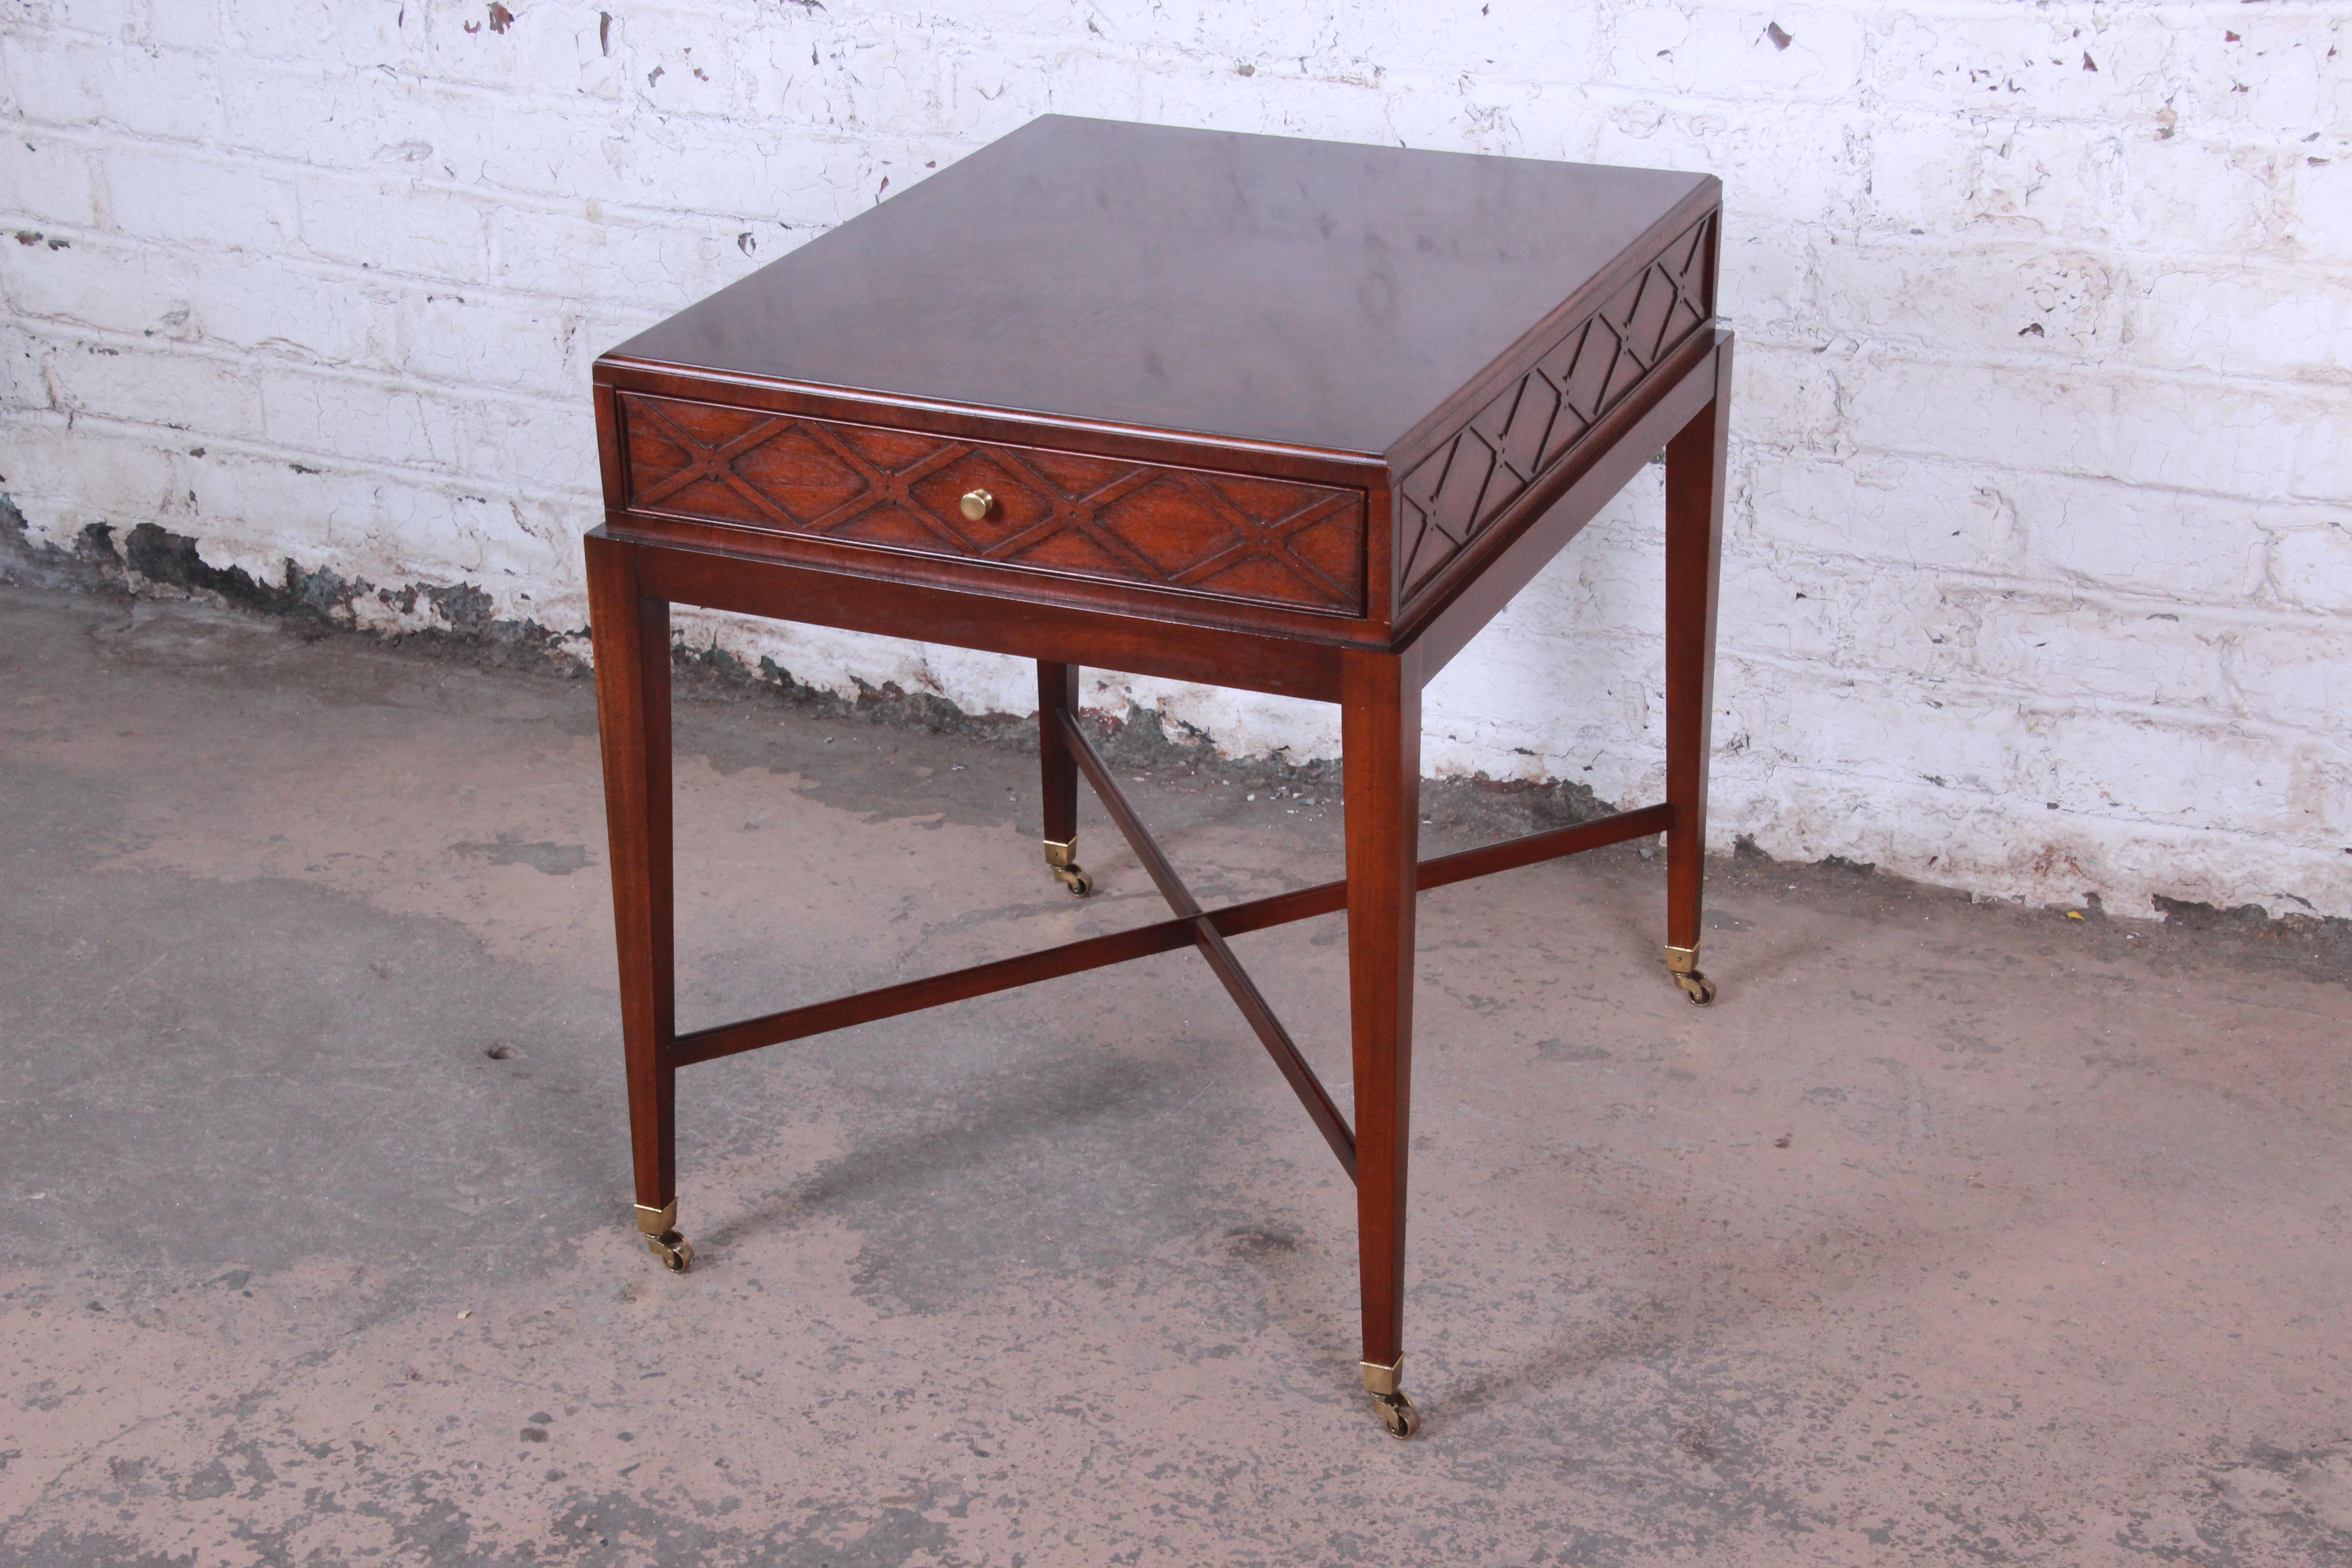 Offering an exceptional colonial reproduction inlaid mahogany side table from the Historic Charleston Collection by Baker Furniture. The table features gorgeous mahogany wood grain and a unique x-base design. It has a single drawer for storage and